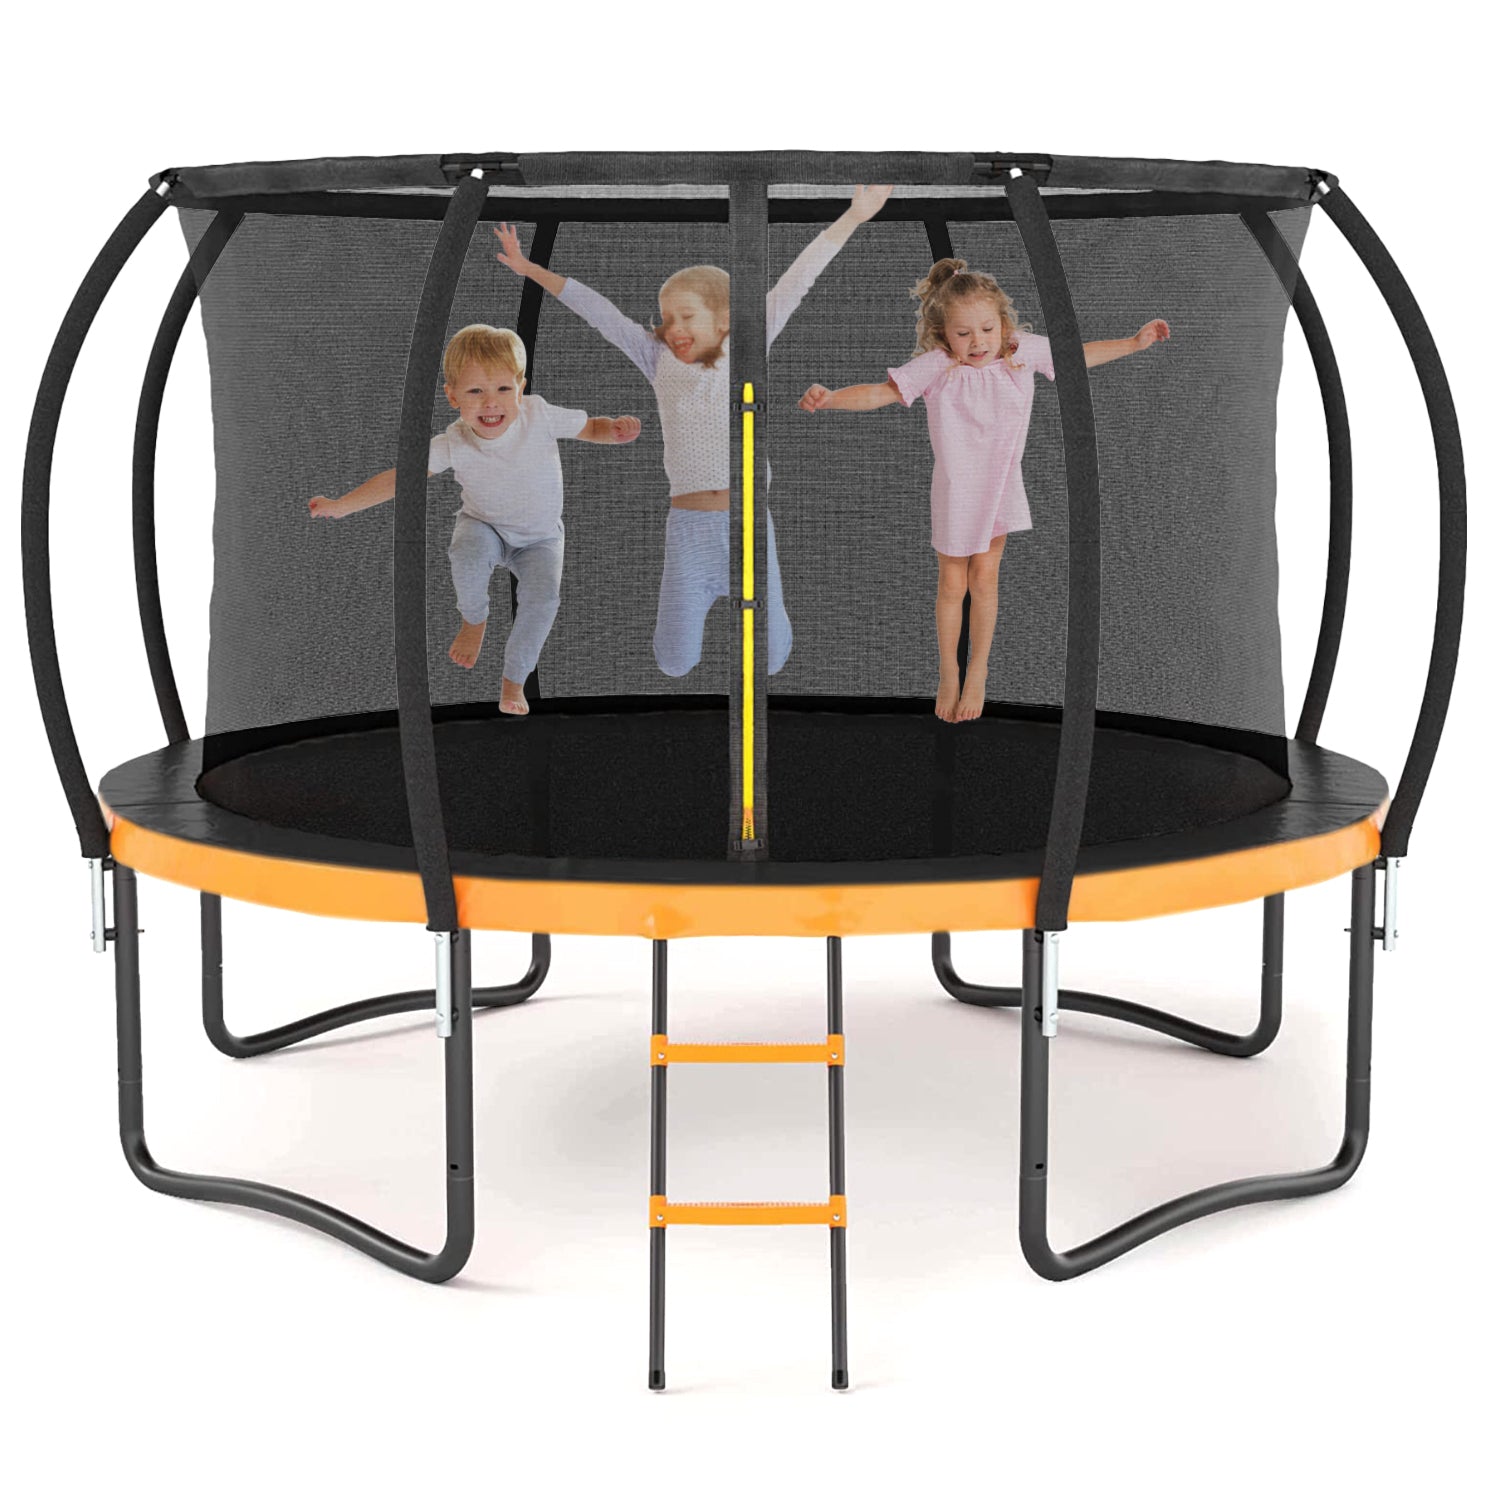 12FT Outdoor Big Trampoline with Inner Safety Enclosure Net, Ladder, PVC Spring Cover Padding - For Kids - Black & Orange Color | Safe and Fun Outdoor Play Equipment |